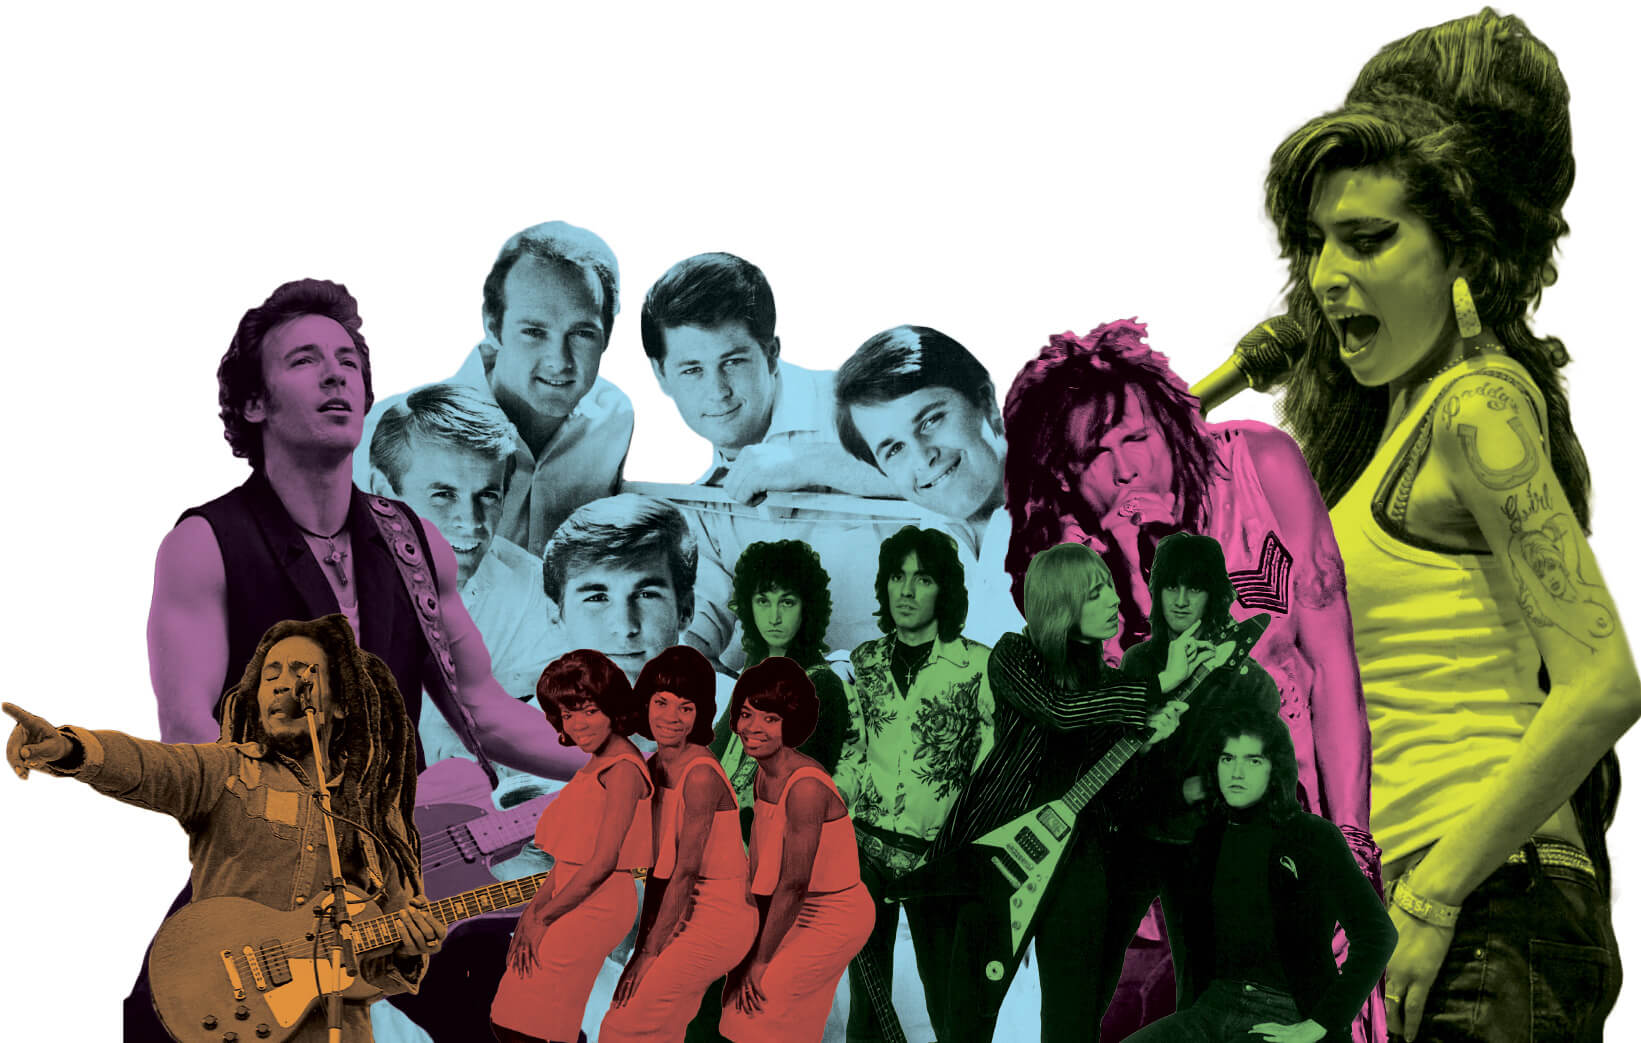 A montage of artists from this issue's playlist, including Bruce Springsteen, Bob Marley, and Martha and the Vandellas